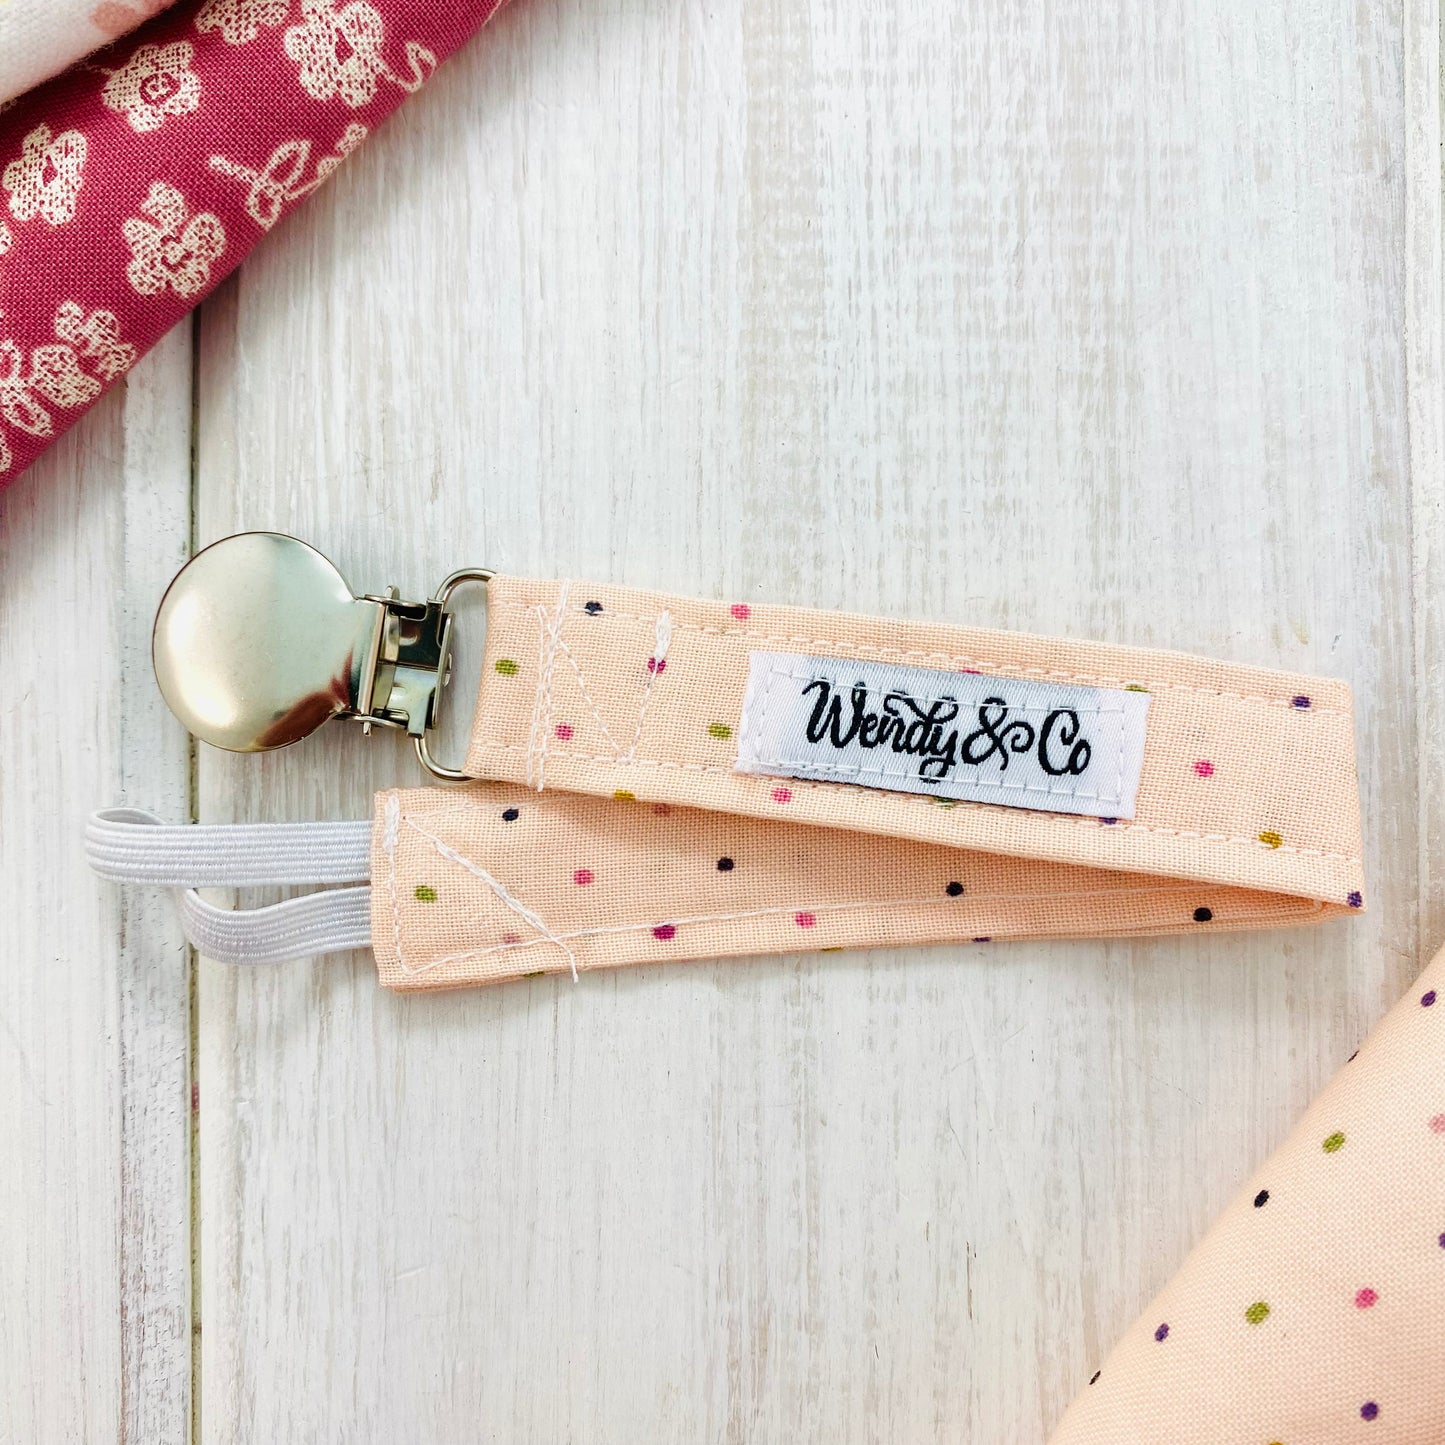 Girly blush pacifier clip with dainty polka dots.